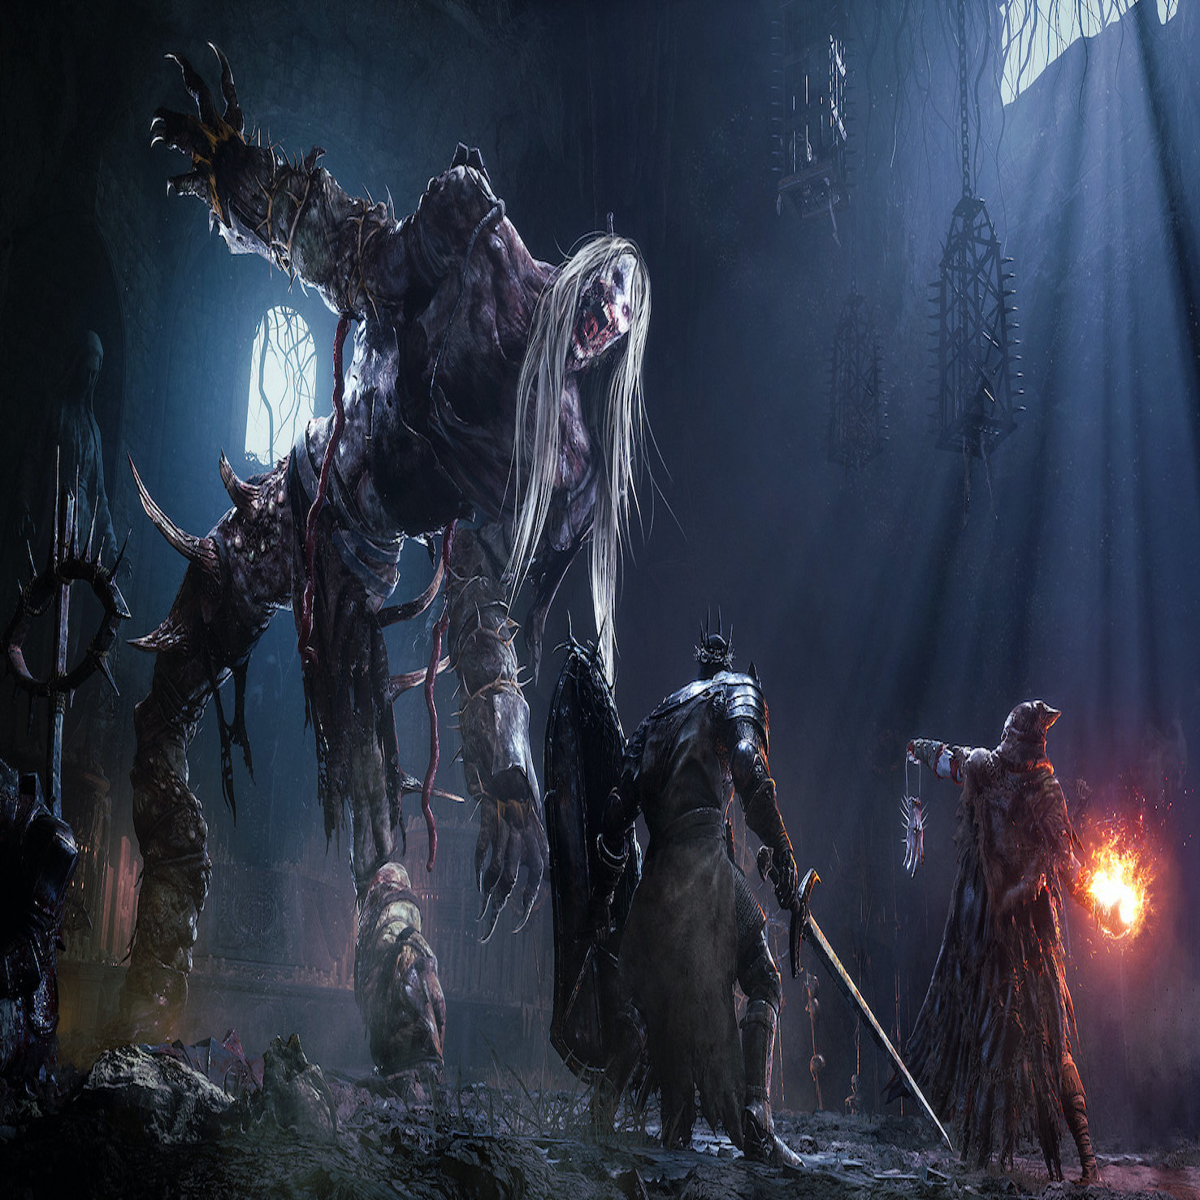 Lords of the Fallen 2' in early stages of development